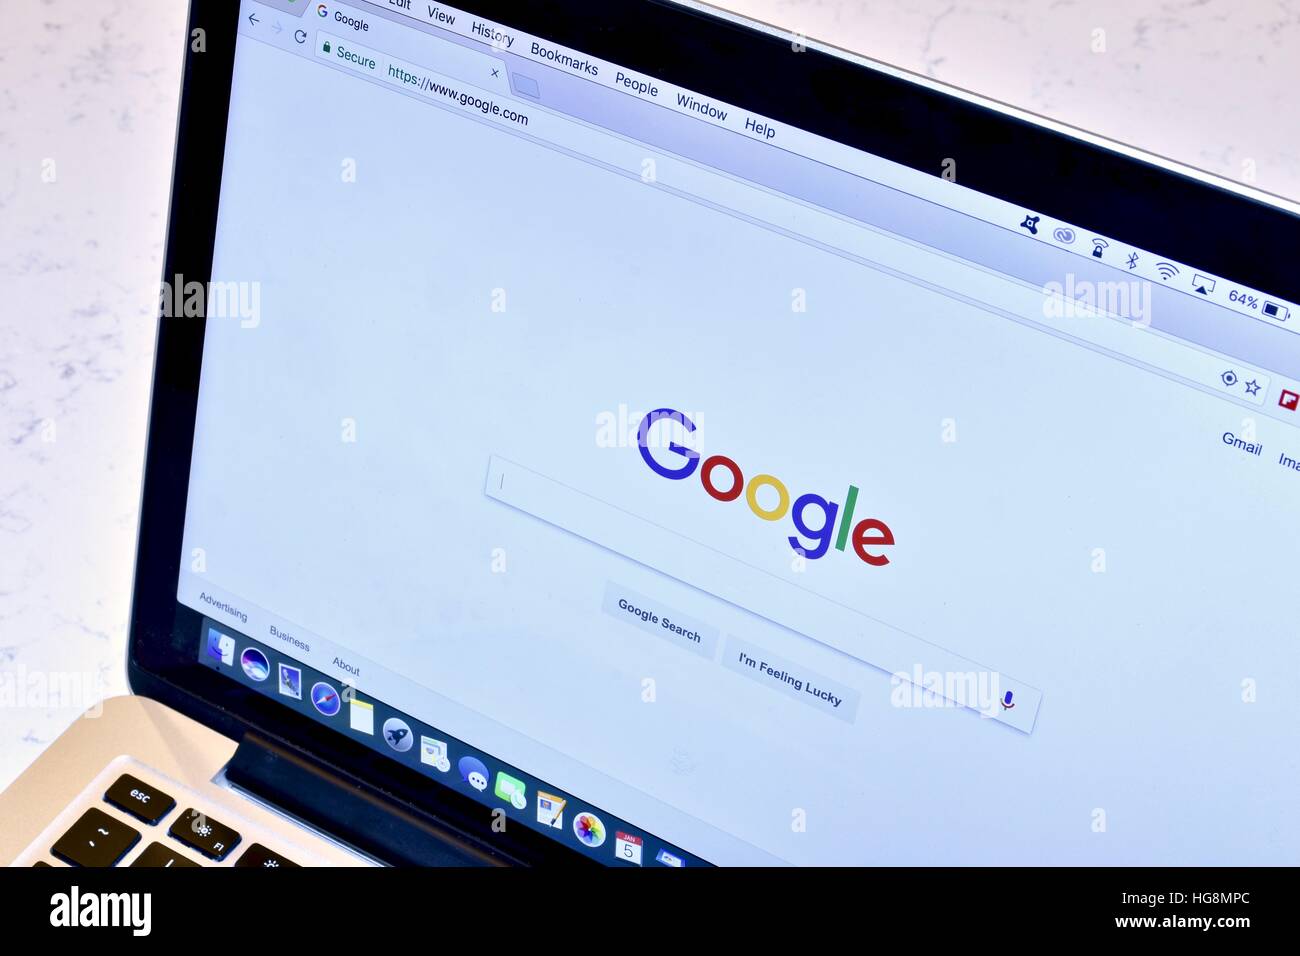 An Apple Macbook Pro with the Google search engine displayed on the screen Stock Photo